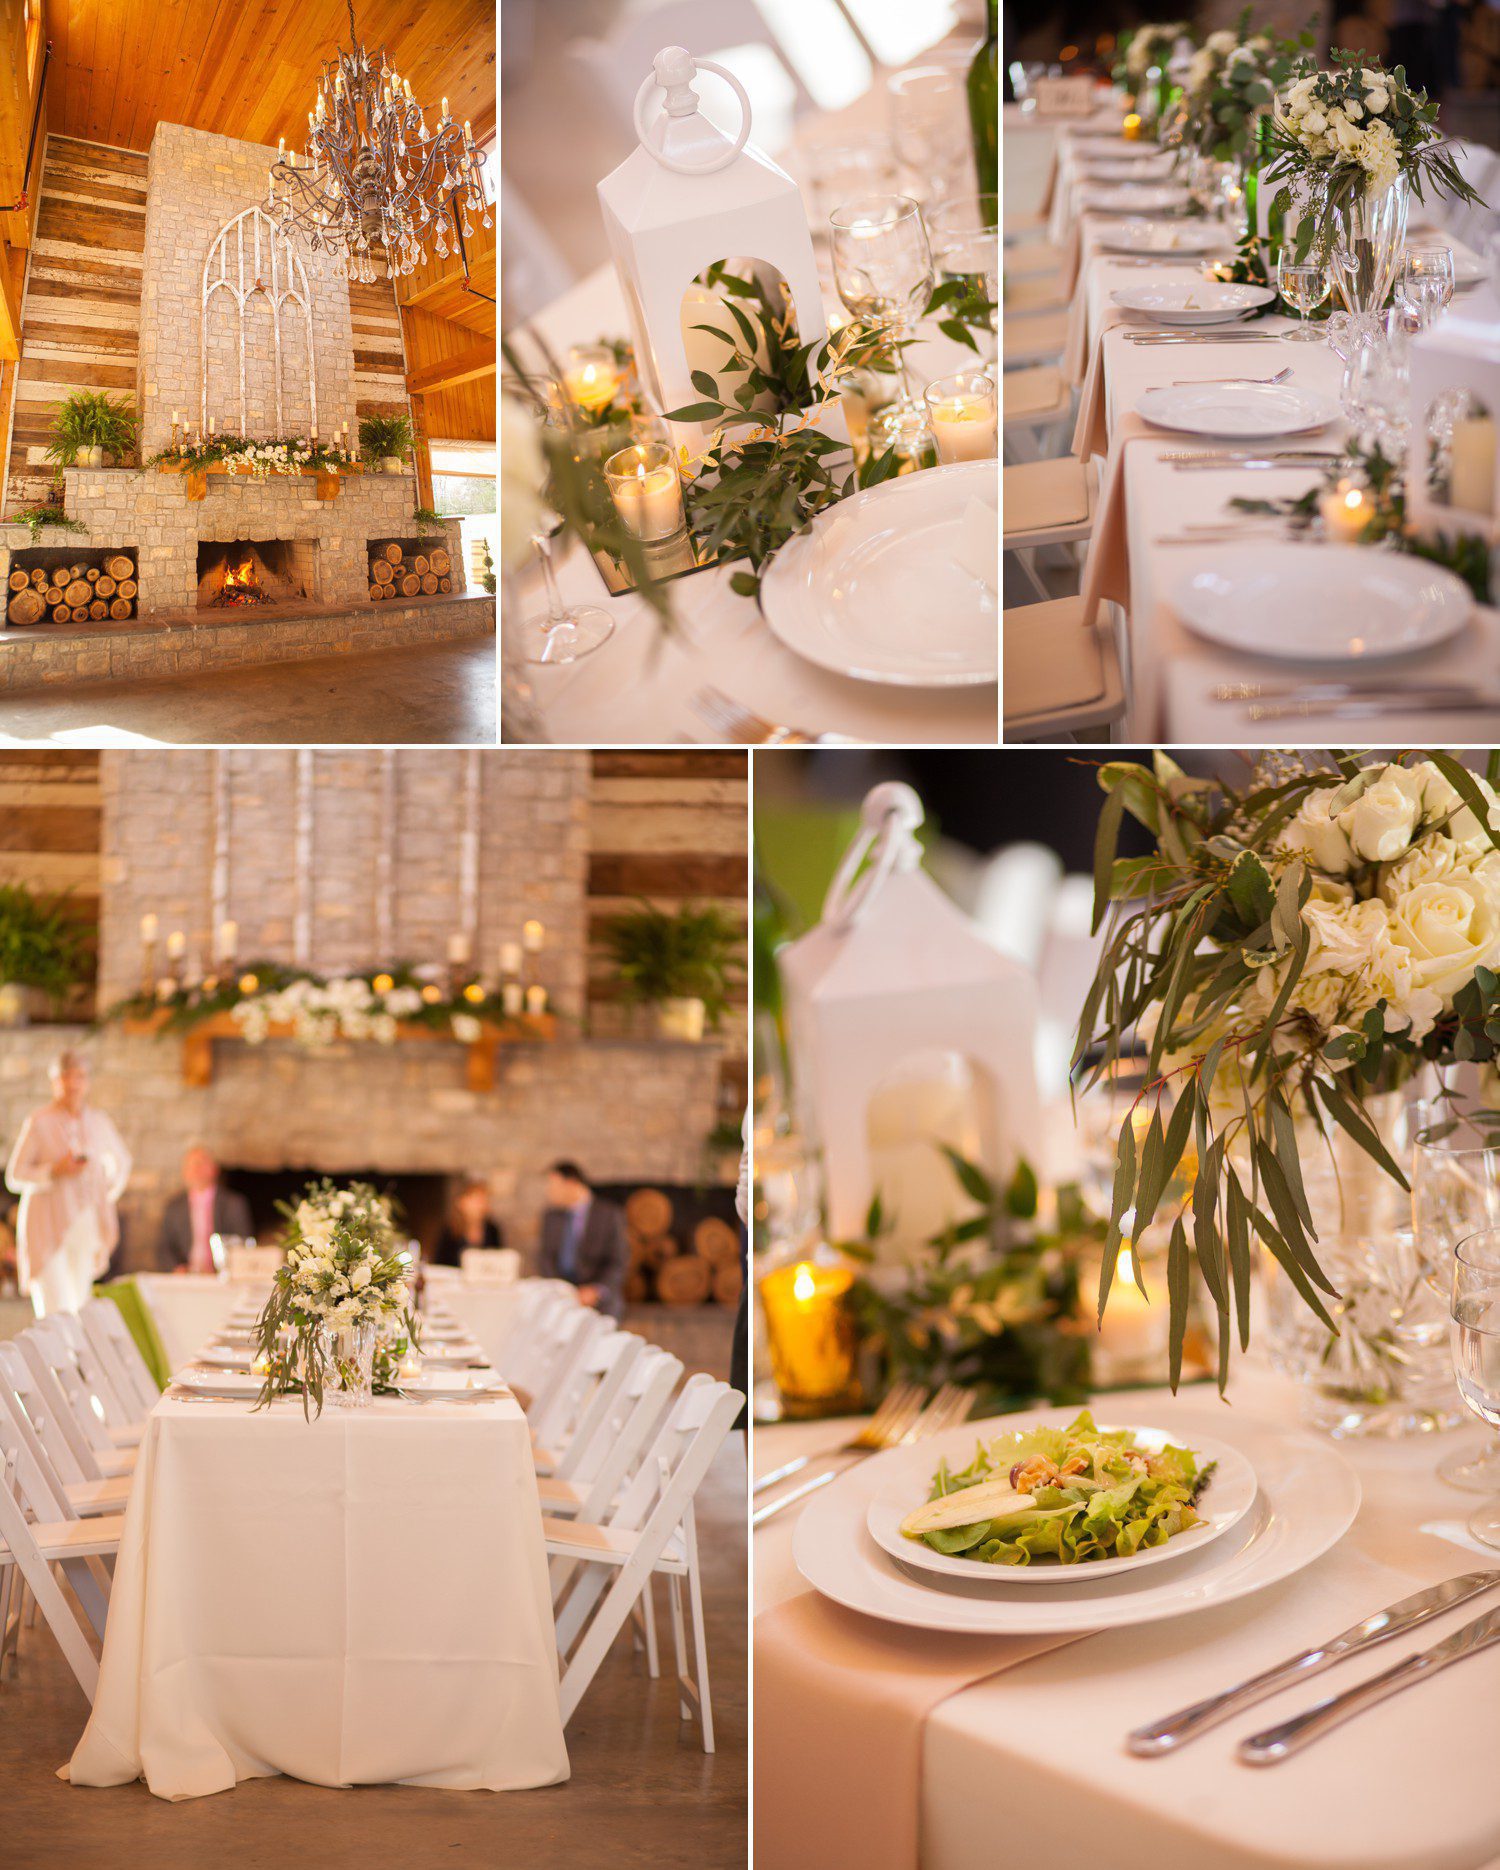 Wedding reception at Homestead Manor in Thompsons Station, TN / Krista Lee Photography